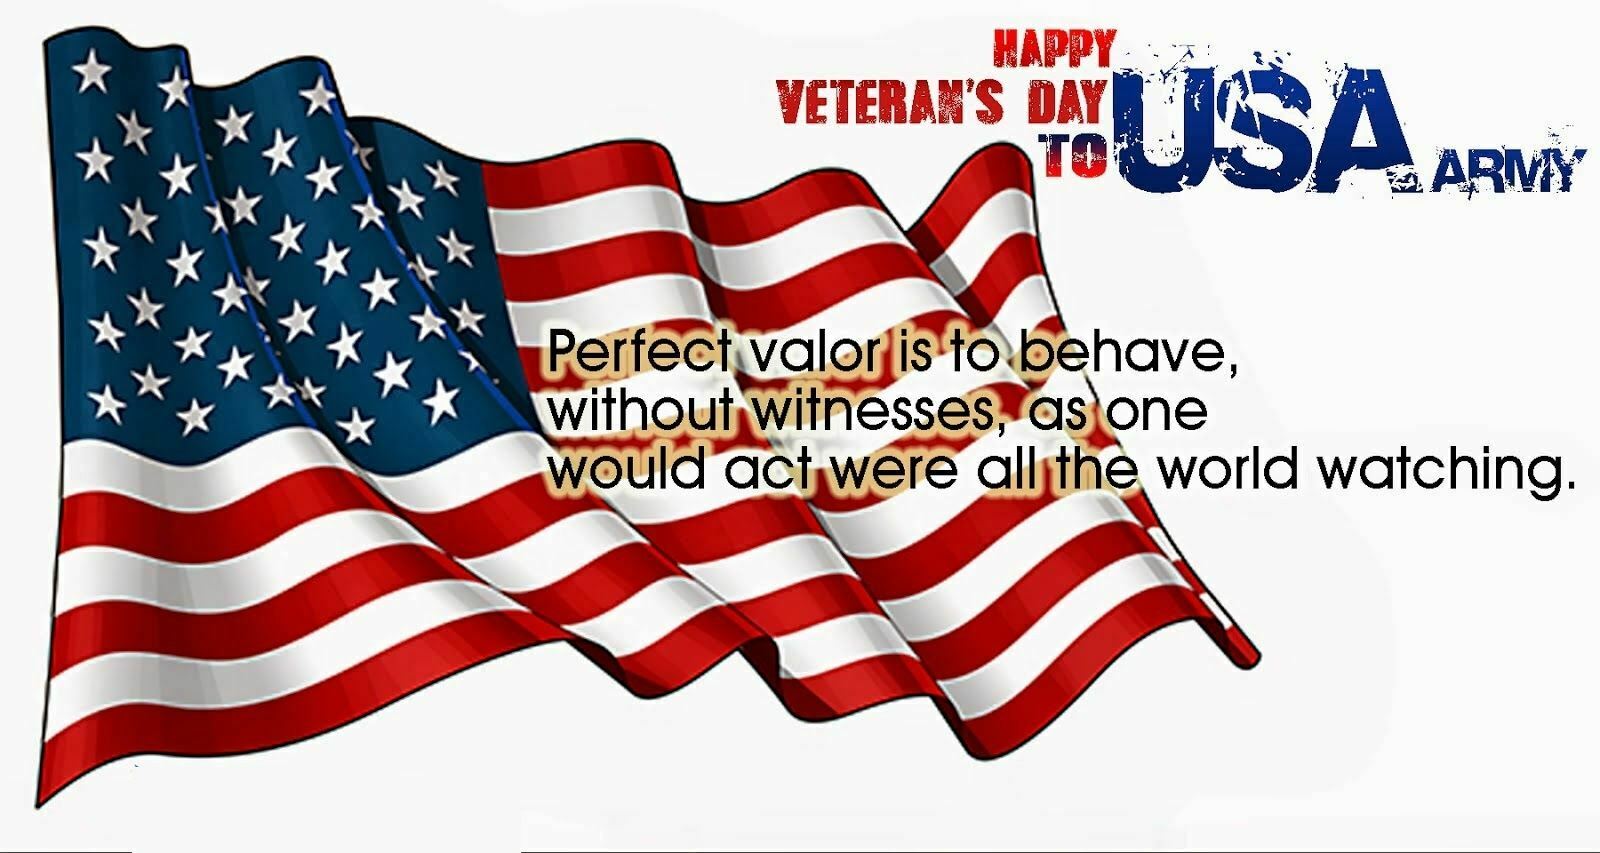 Veterans Day SMS Messages